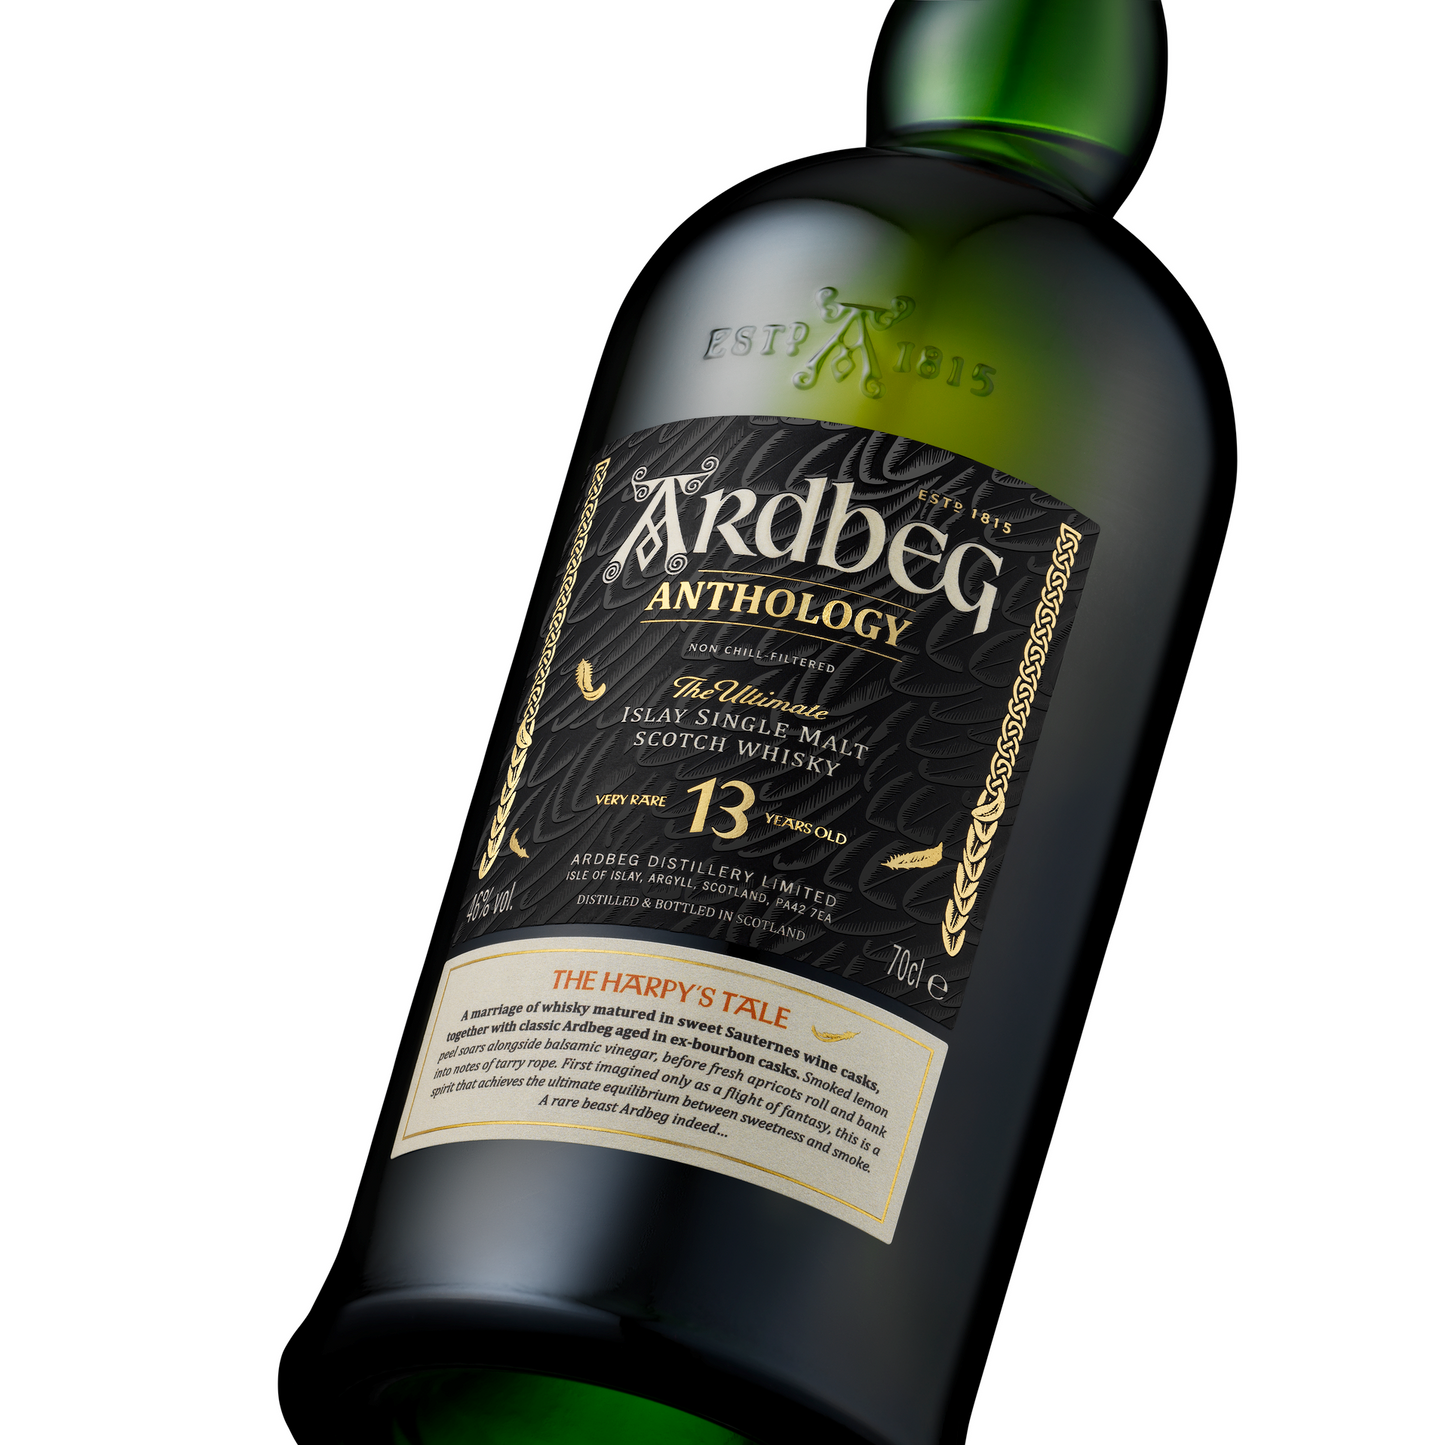 Ardbeg 13 Years Old Anthology Limited Edition + Wee Beastie 5 Years Old